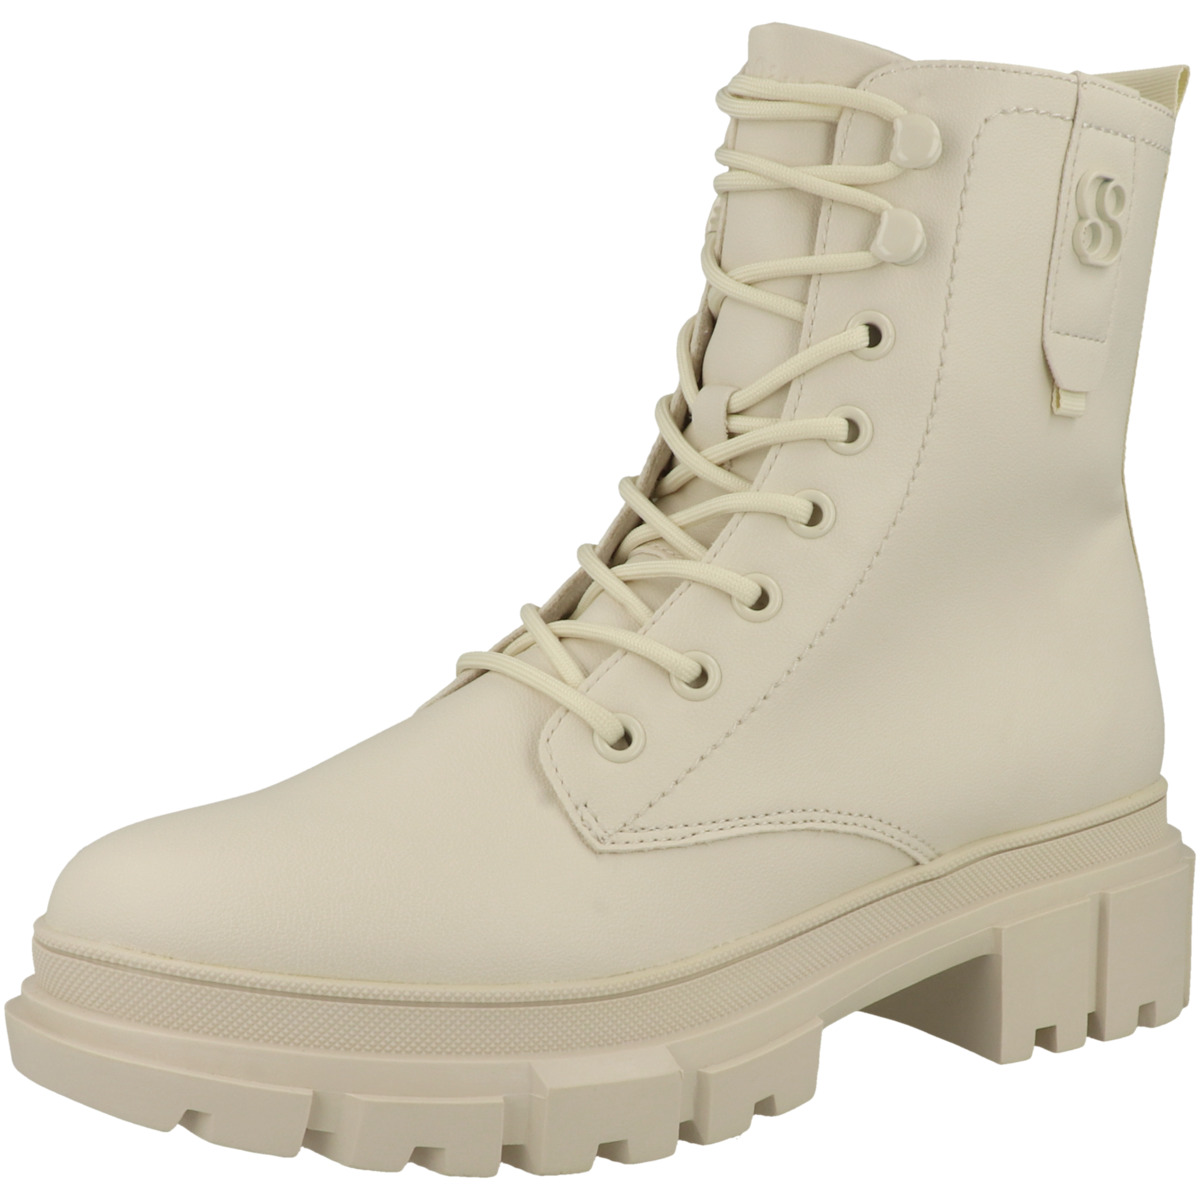 s.Oliver 5-25214-41 Boots creme